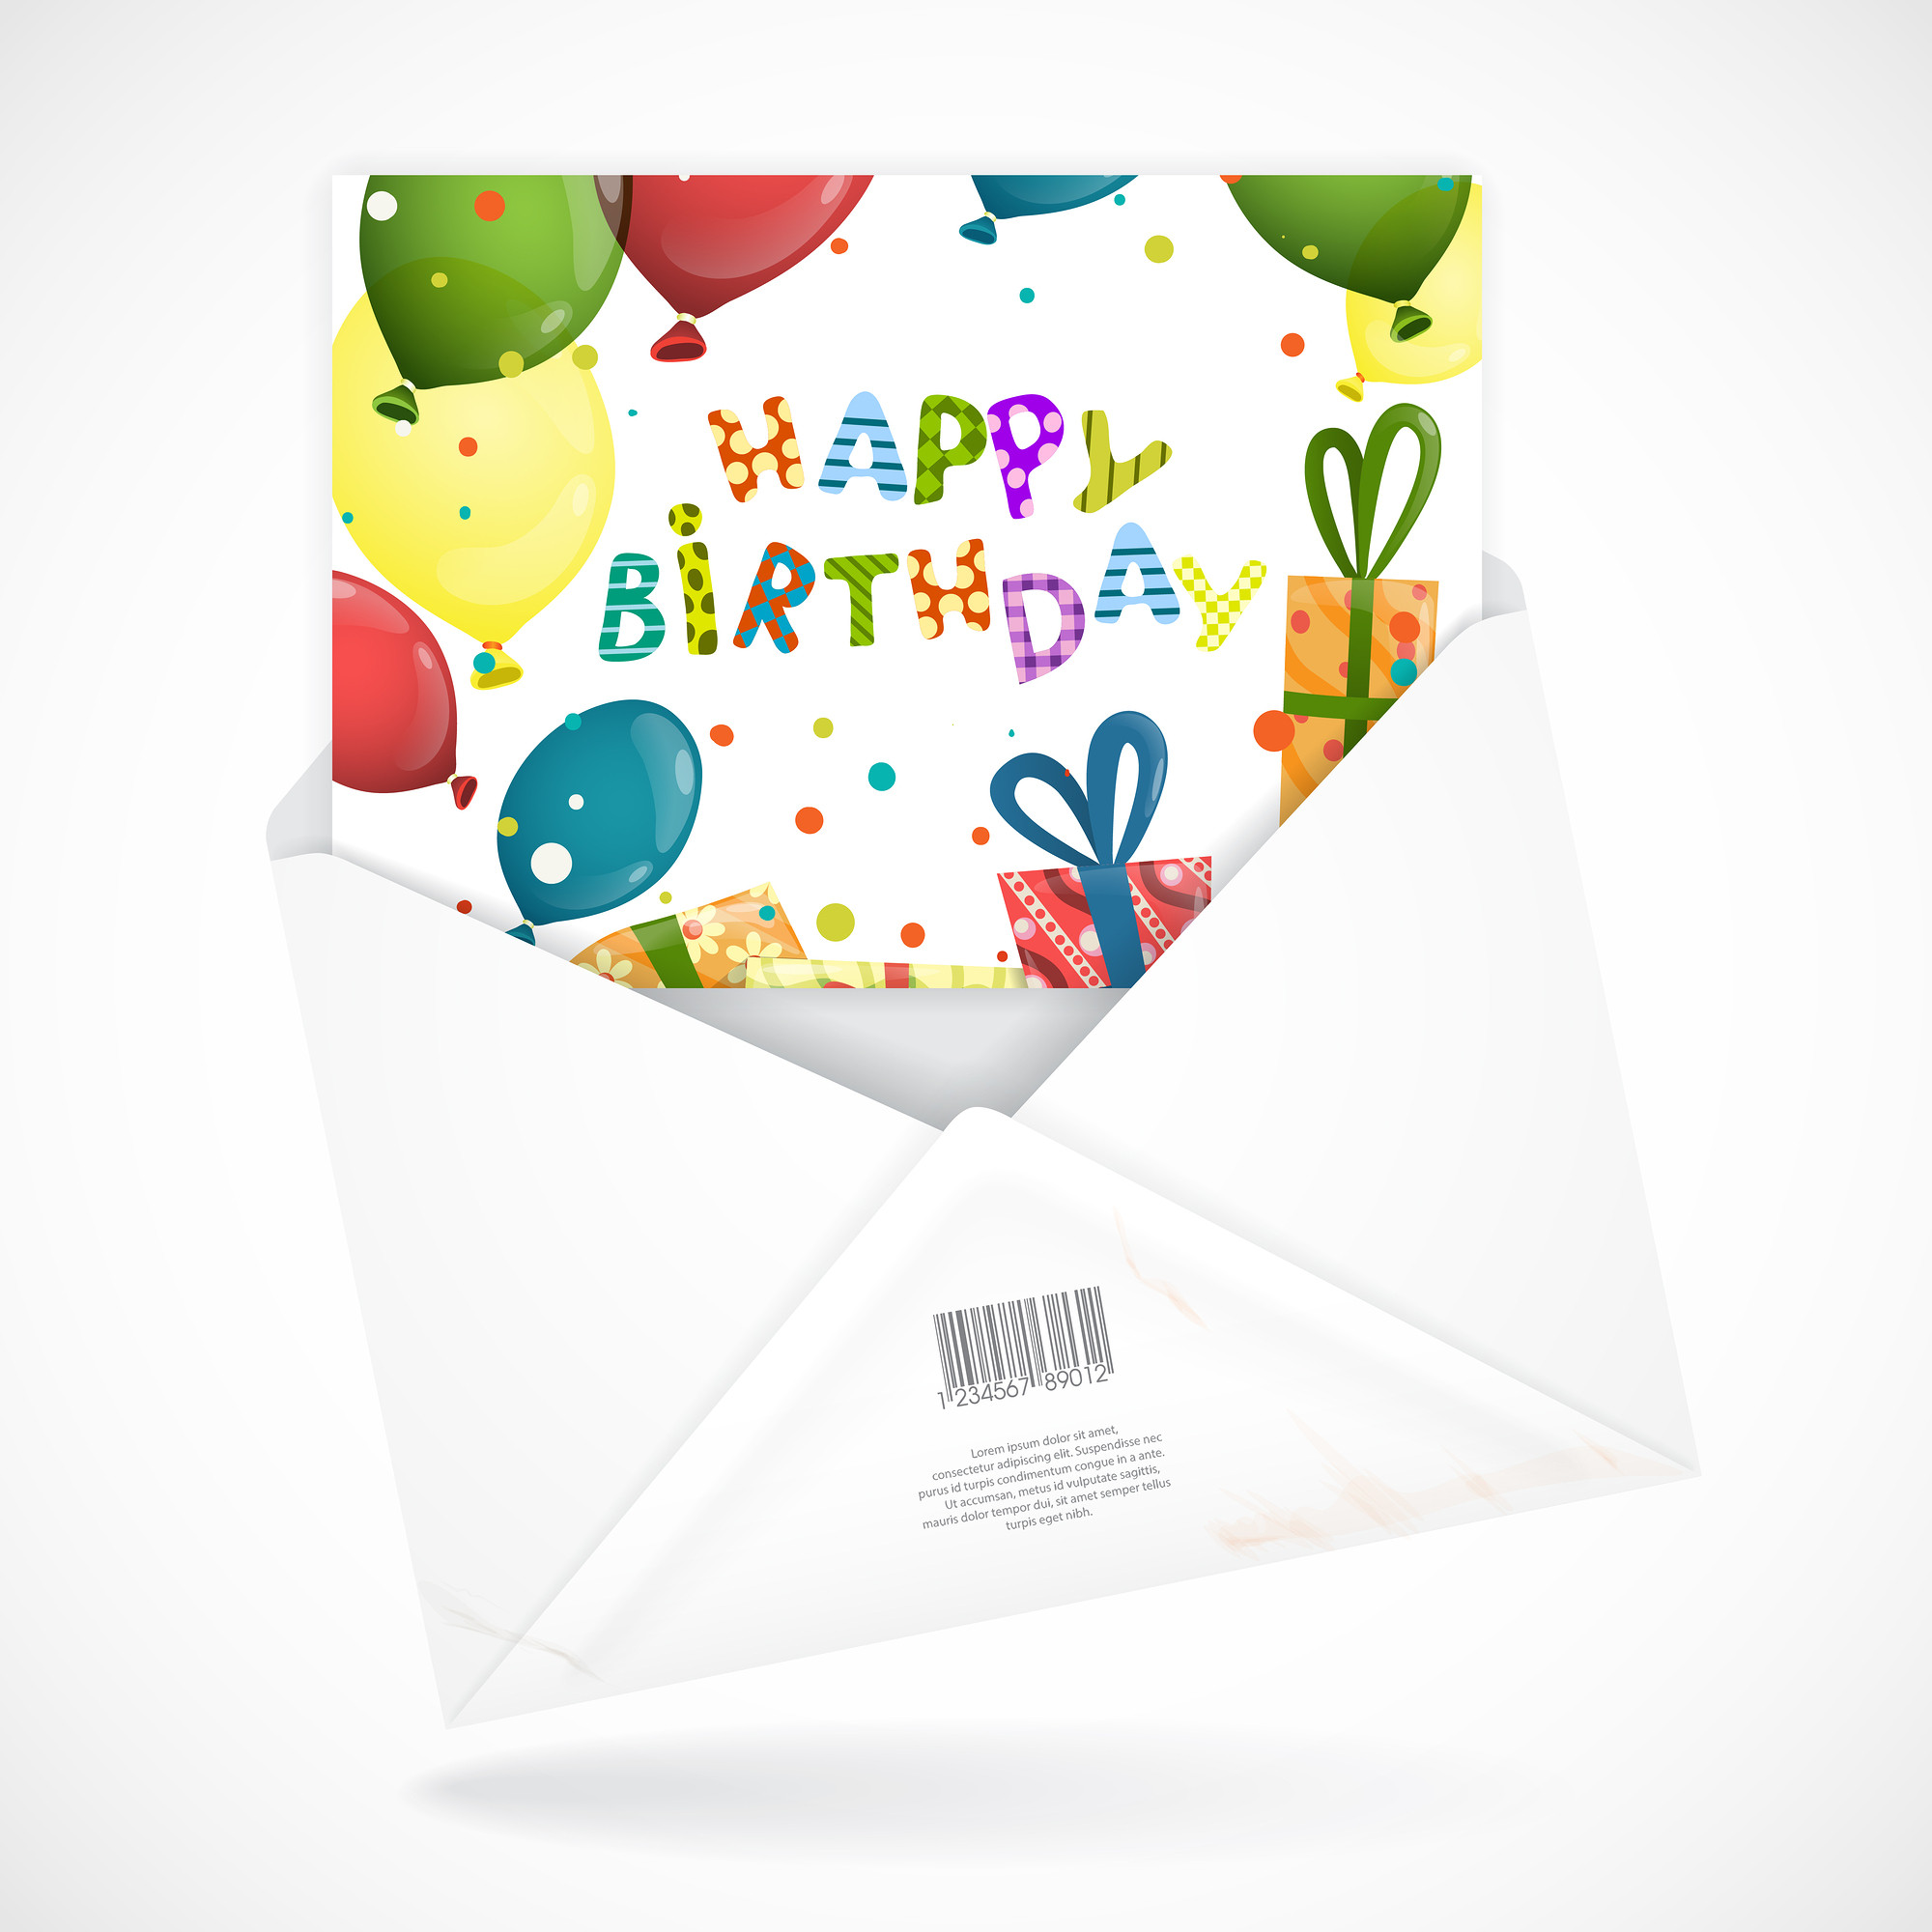 Corporate Birthday Cards
 Birthday Cards For Business Can Improve Customer Retention